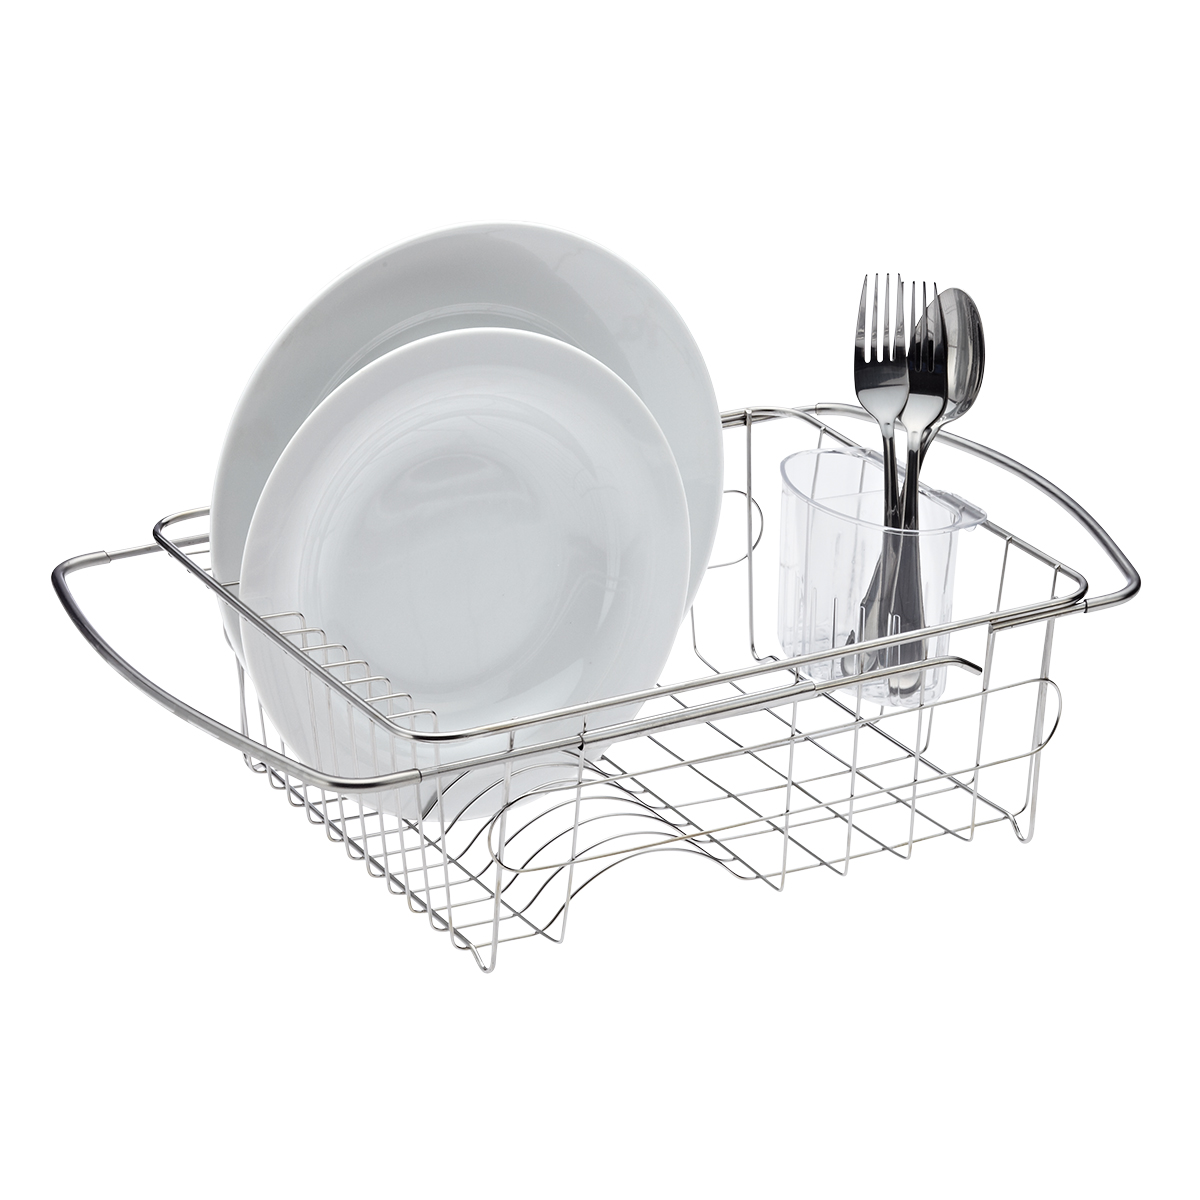 Stainless Steel In-Sink Dish Drainer